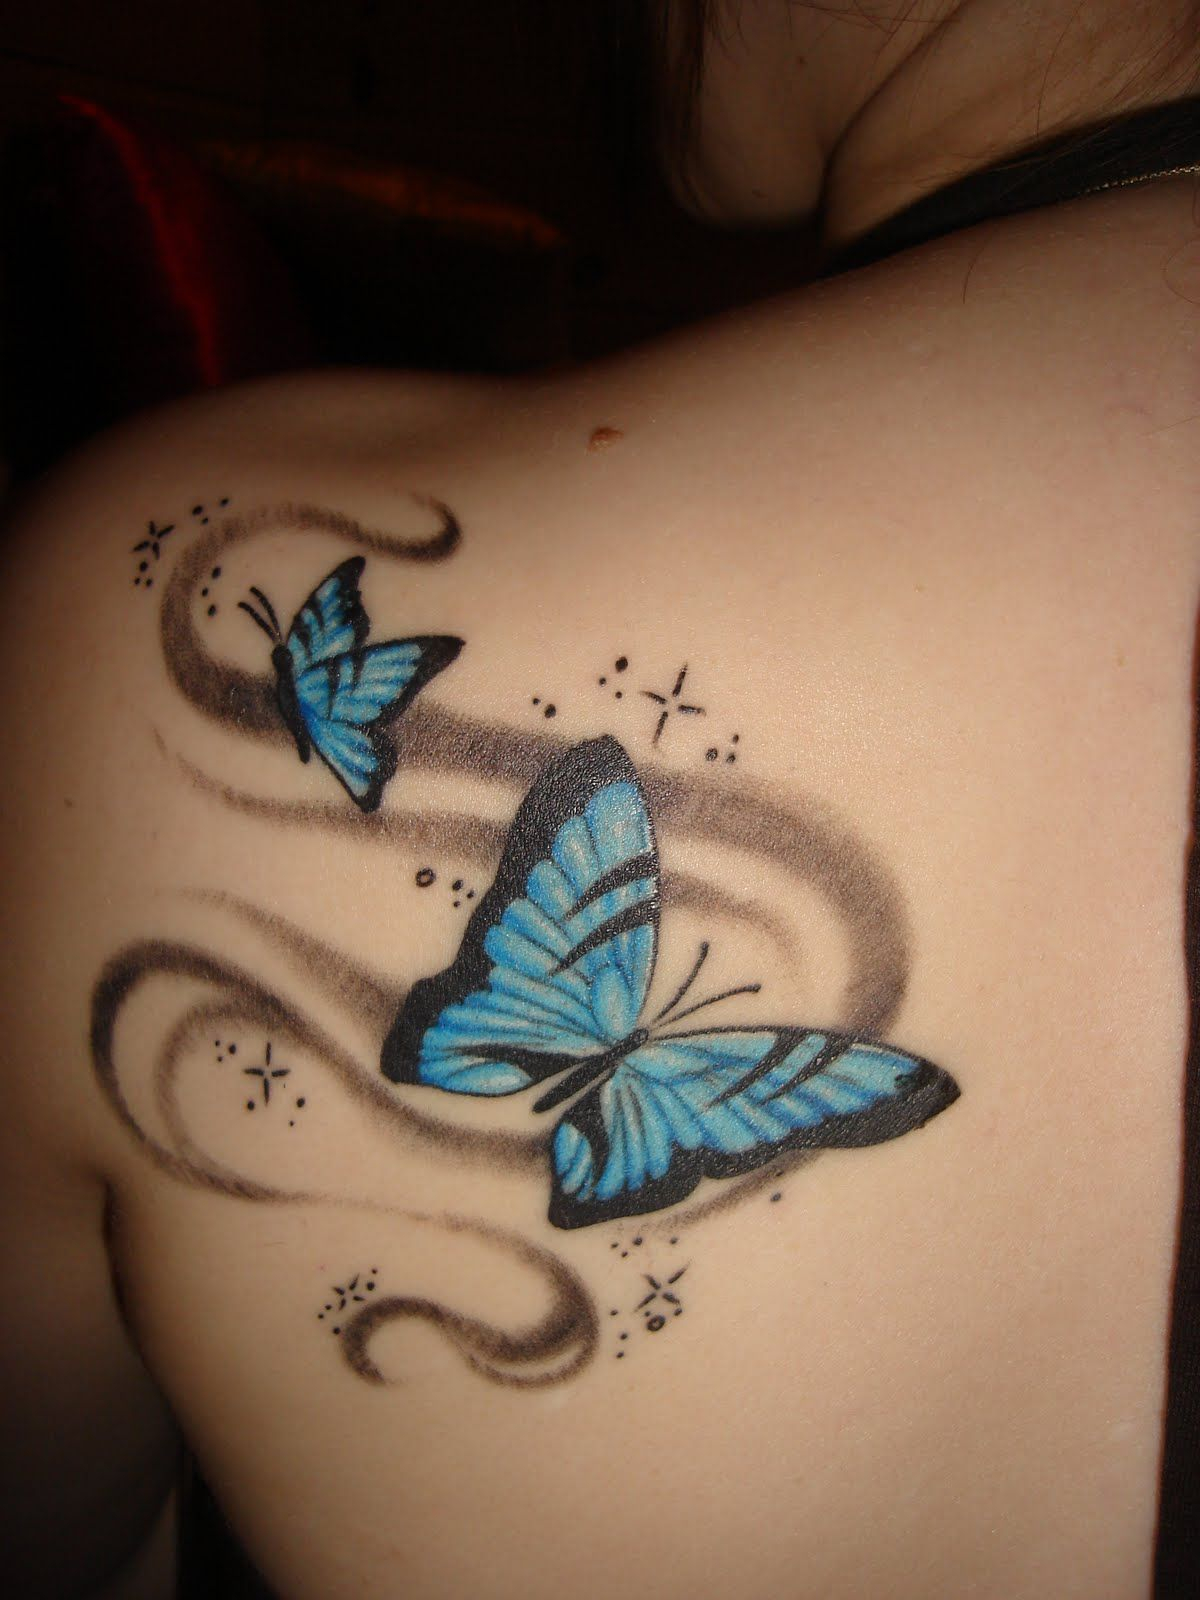 Blue Butterfly Tattoo Designs Tats Butterfly Tattoo Meaning pertaining to dimensions 1200 X 1600